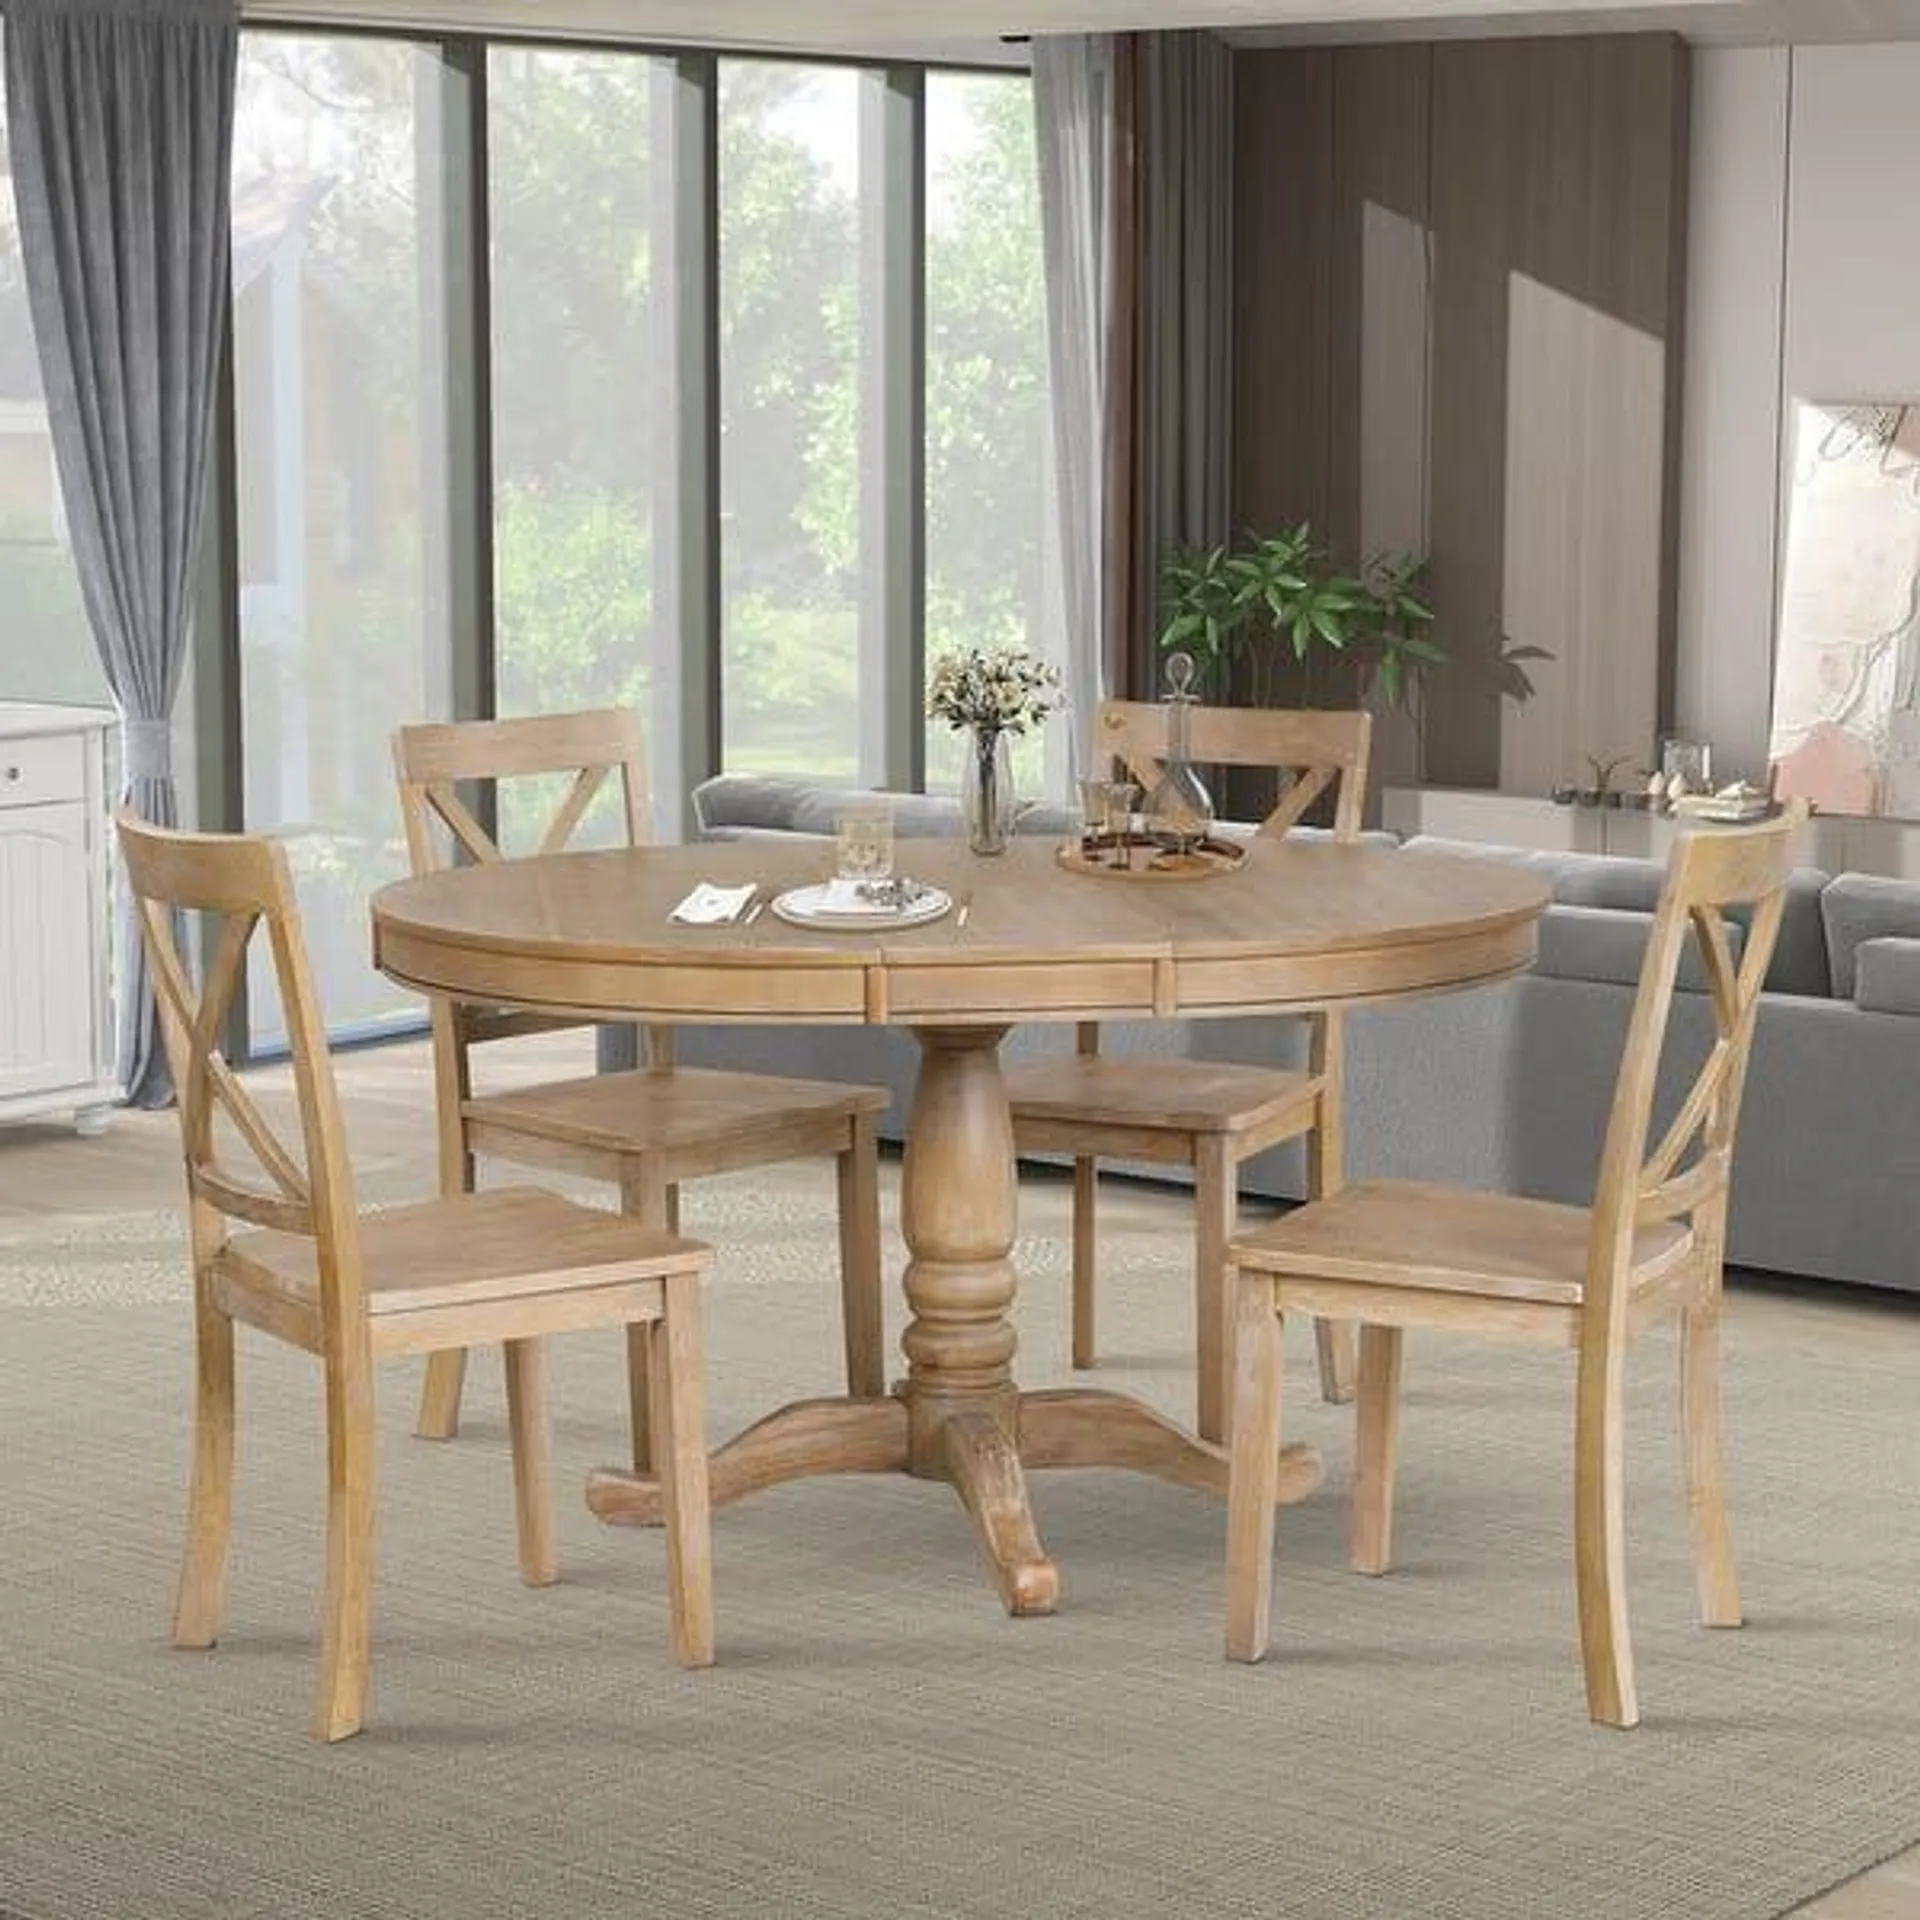 5 Piece Round Dining Table Set for 4 ,Natural Wood Wash